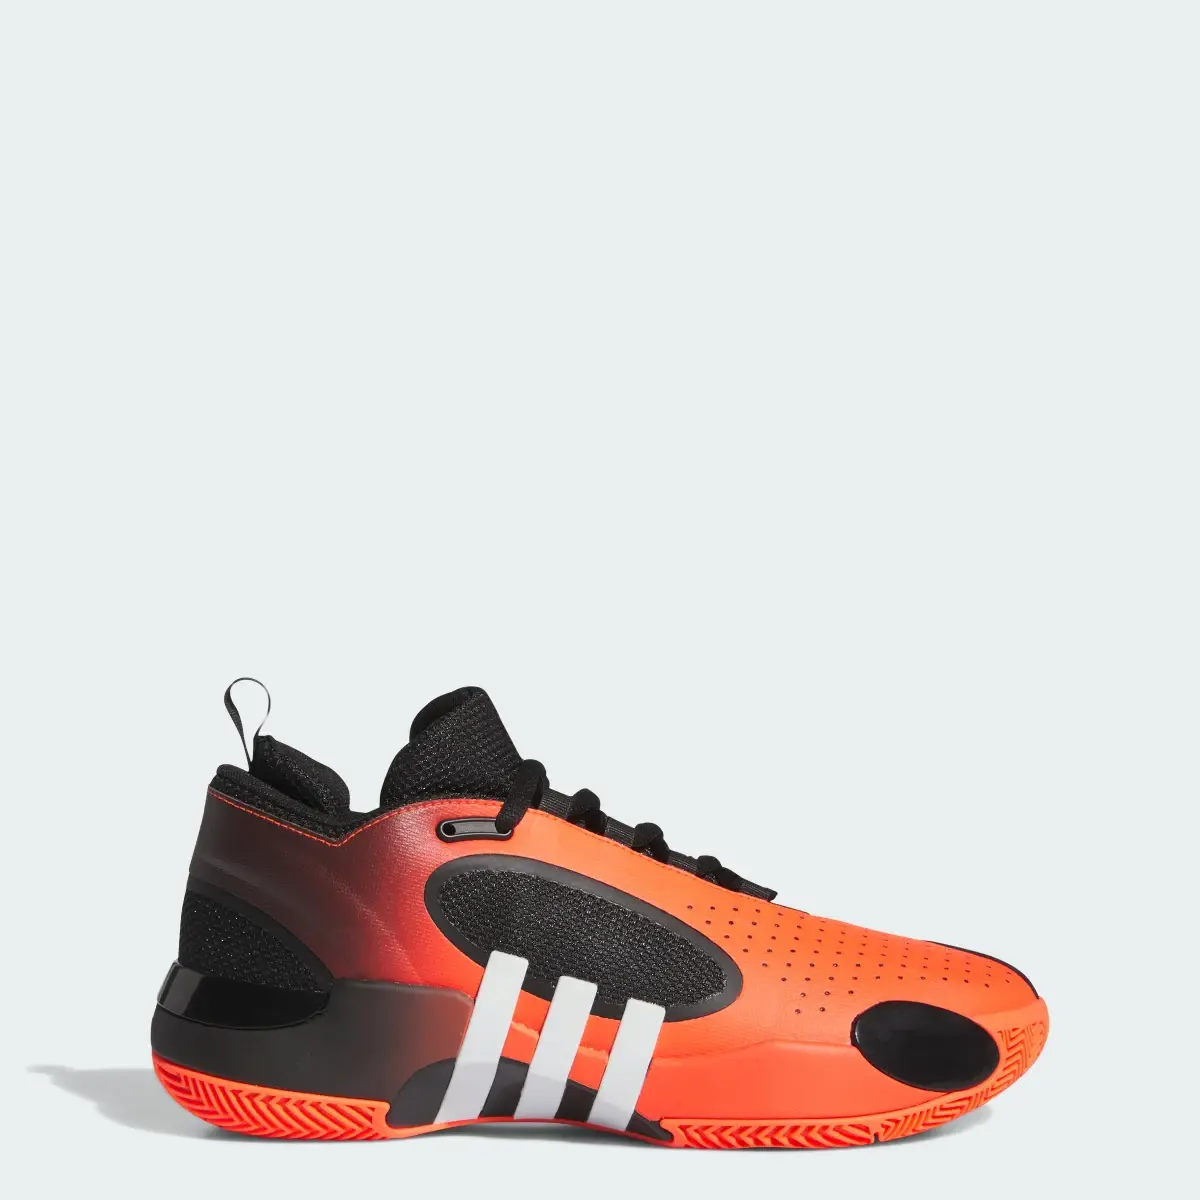 Adidas D.O.N. Issue 5 Basketball Shoes. 1